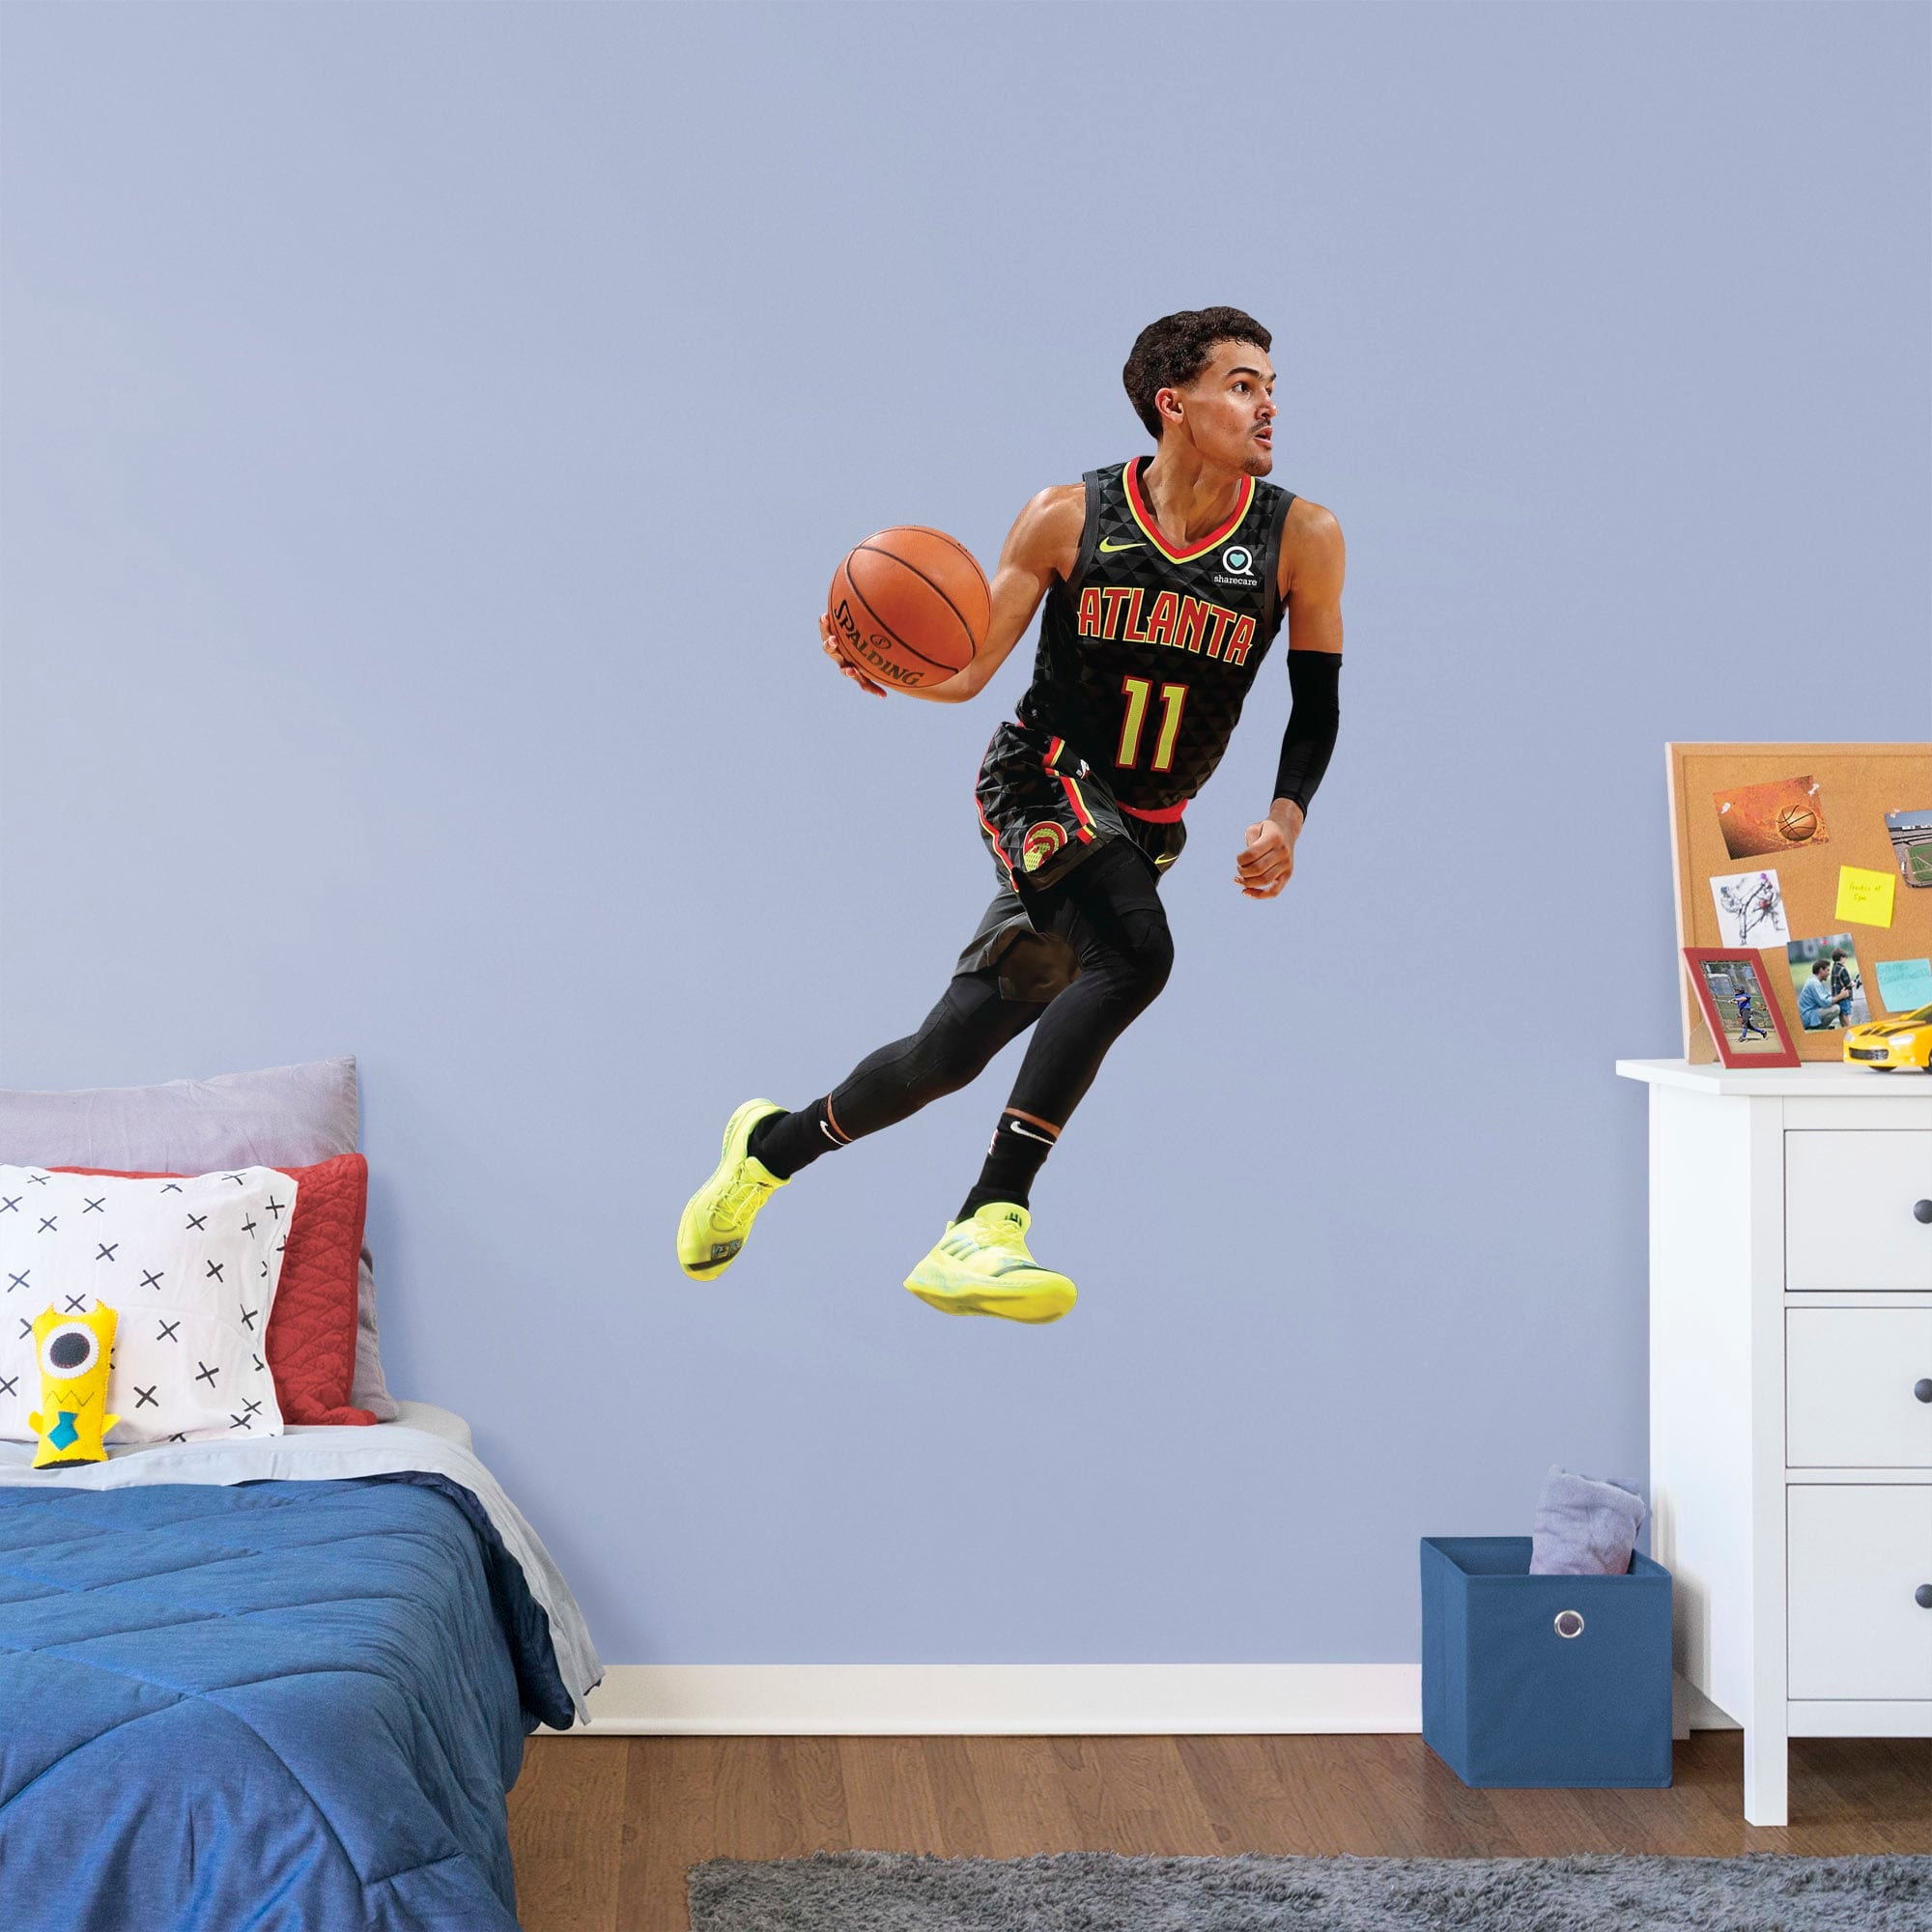 Trae Young for Atlanta Hawks - Officially Licensed NBA Removable Wall Decal Giant Athlete + 2 Decals (34"W x 51"H) by Fathead |